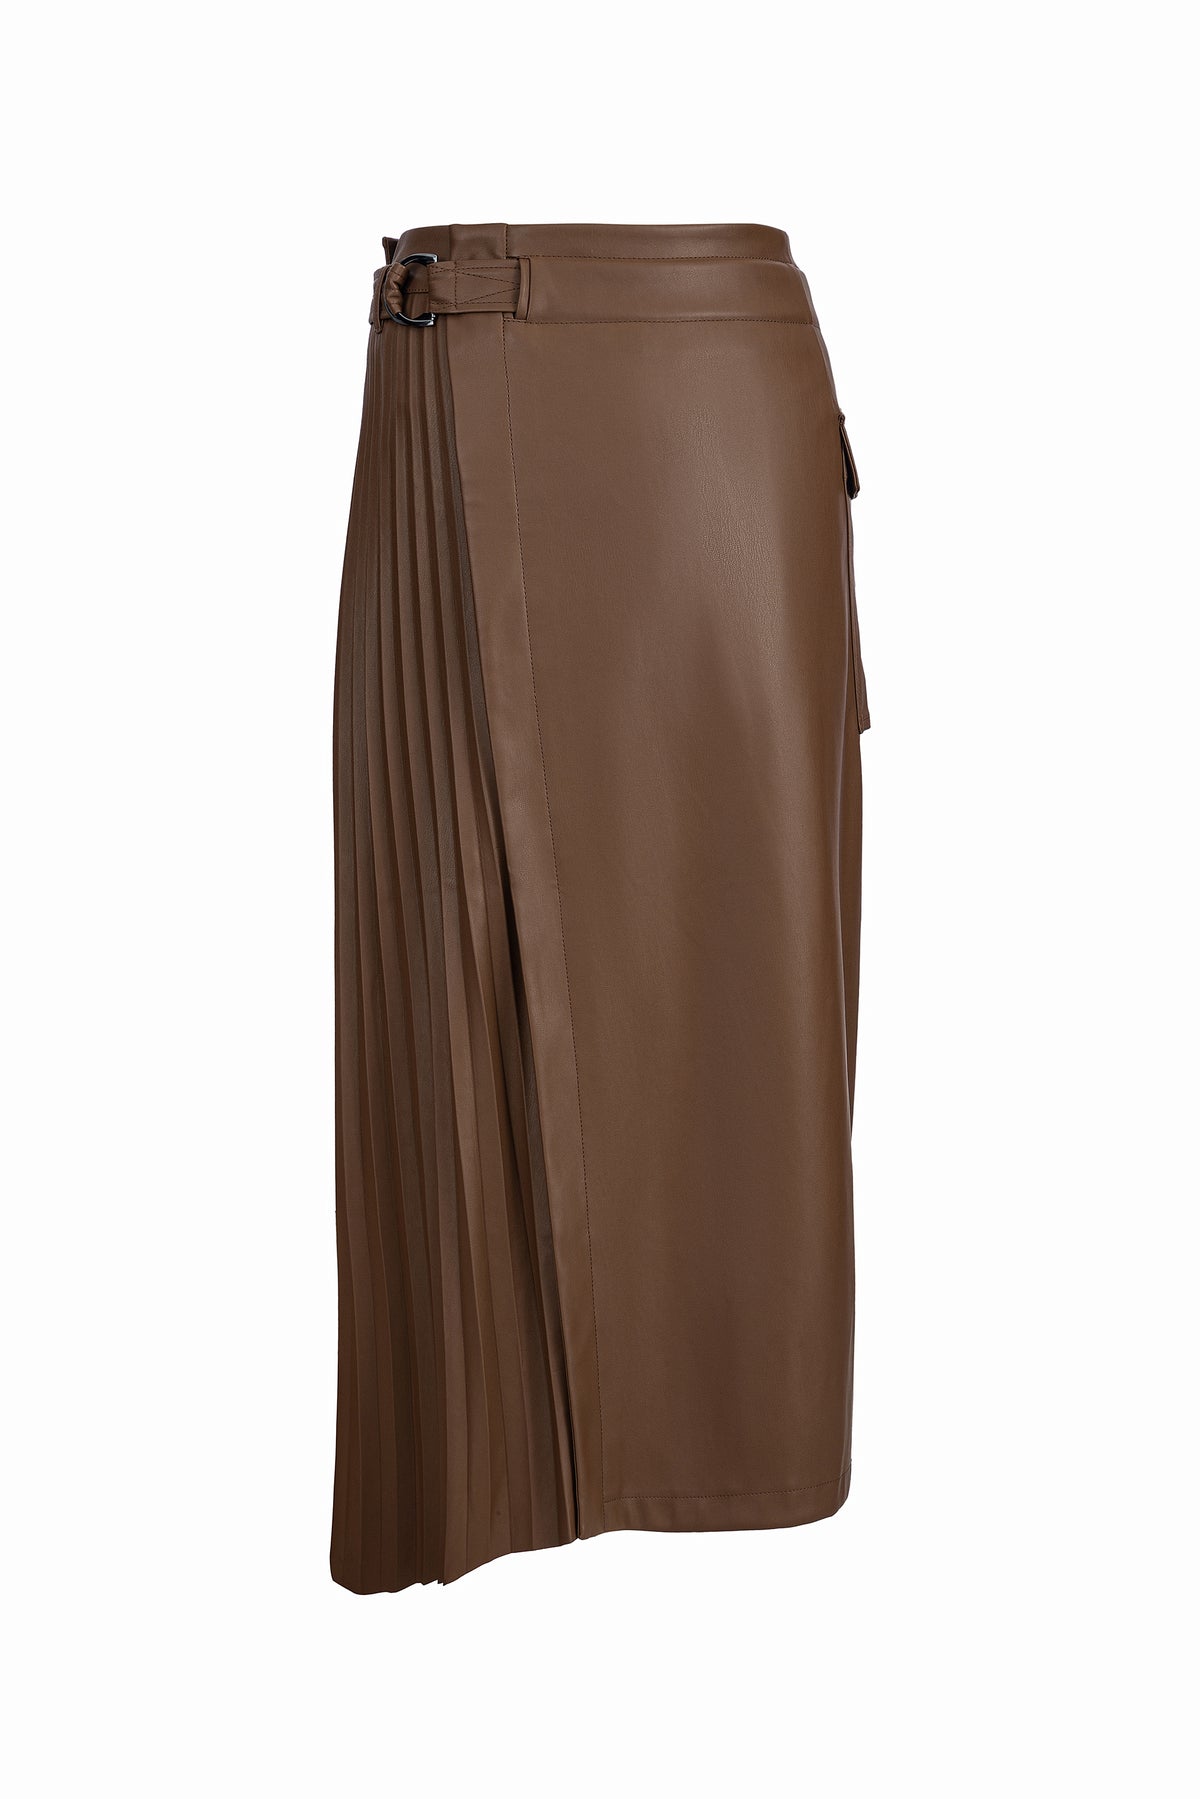 Faux Leather Skirt in Nut